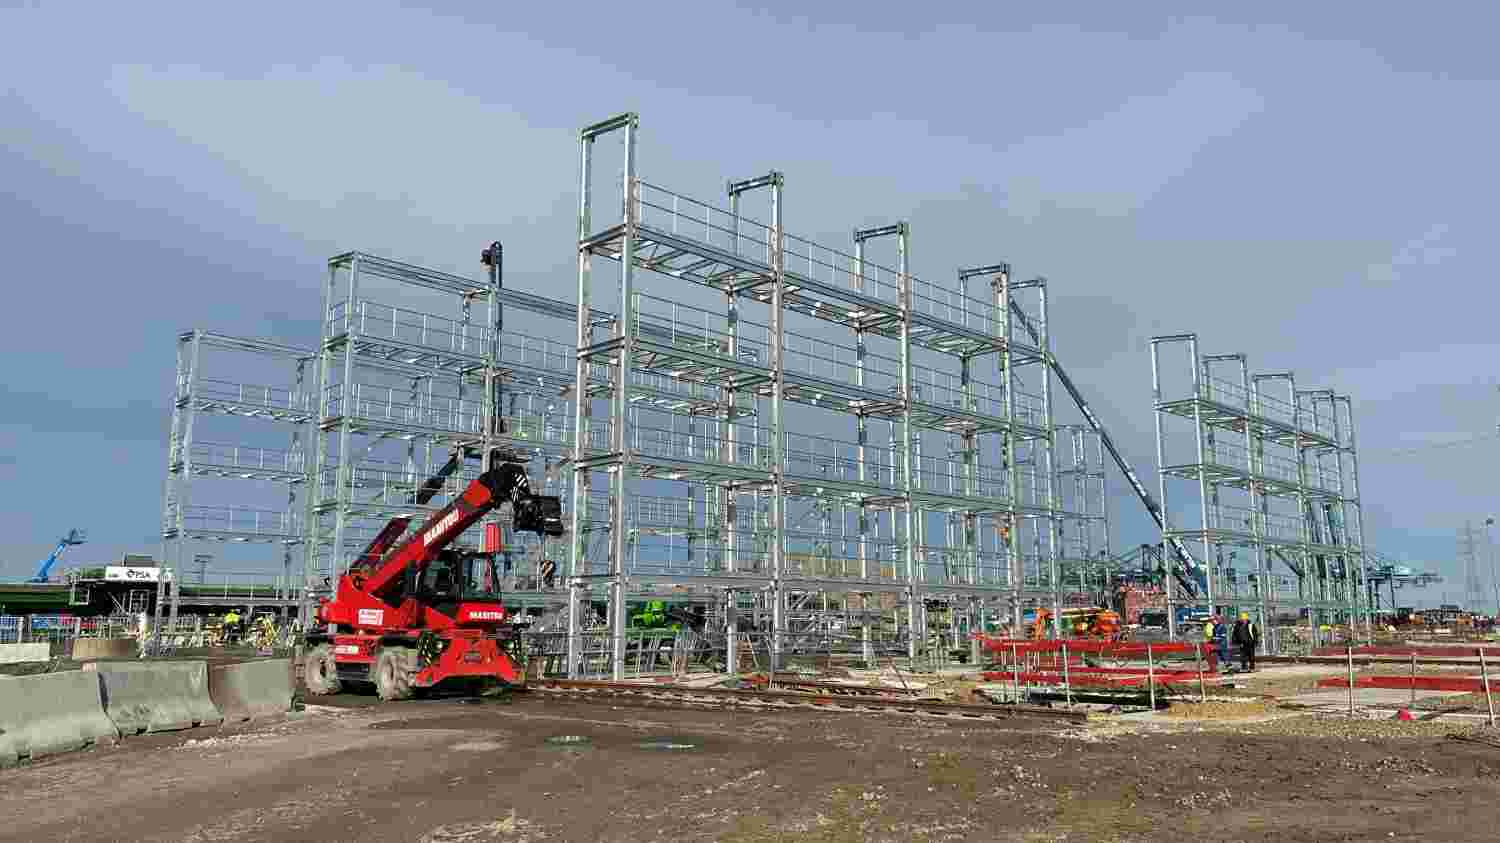 refrigerated_container_racks_reefer_racks_Steel_Structure_China_04_Antwerp_Reefer Rack_Steel_Frame Construction